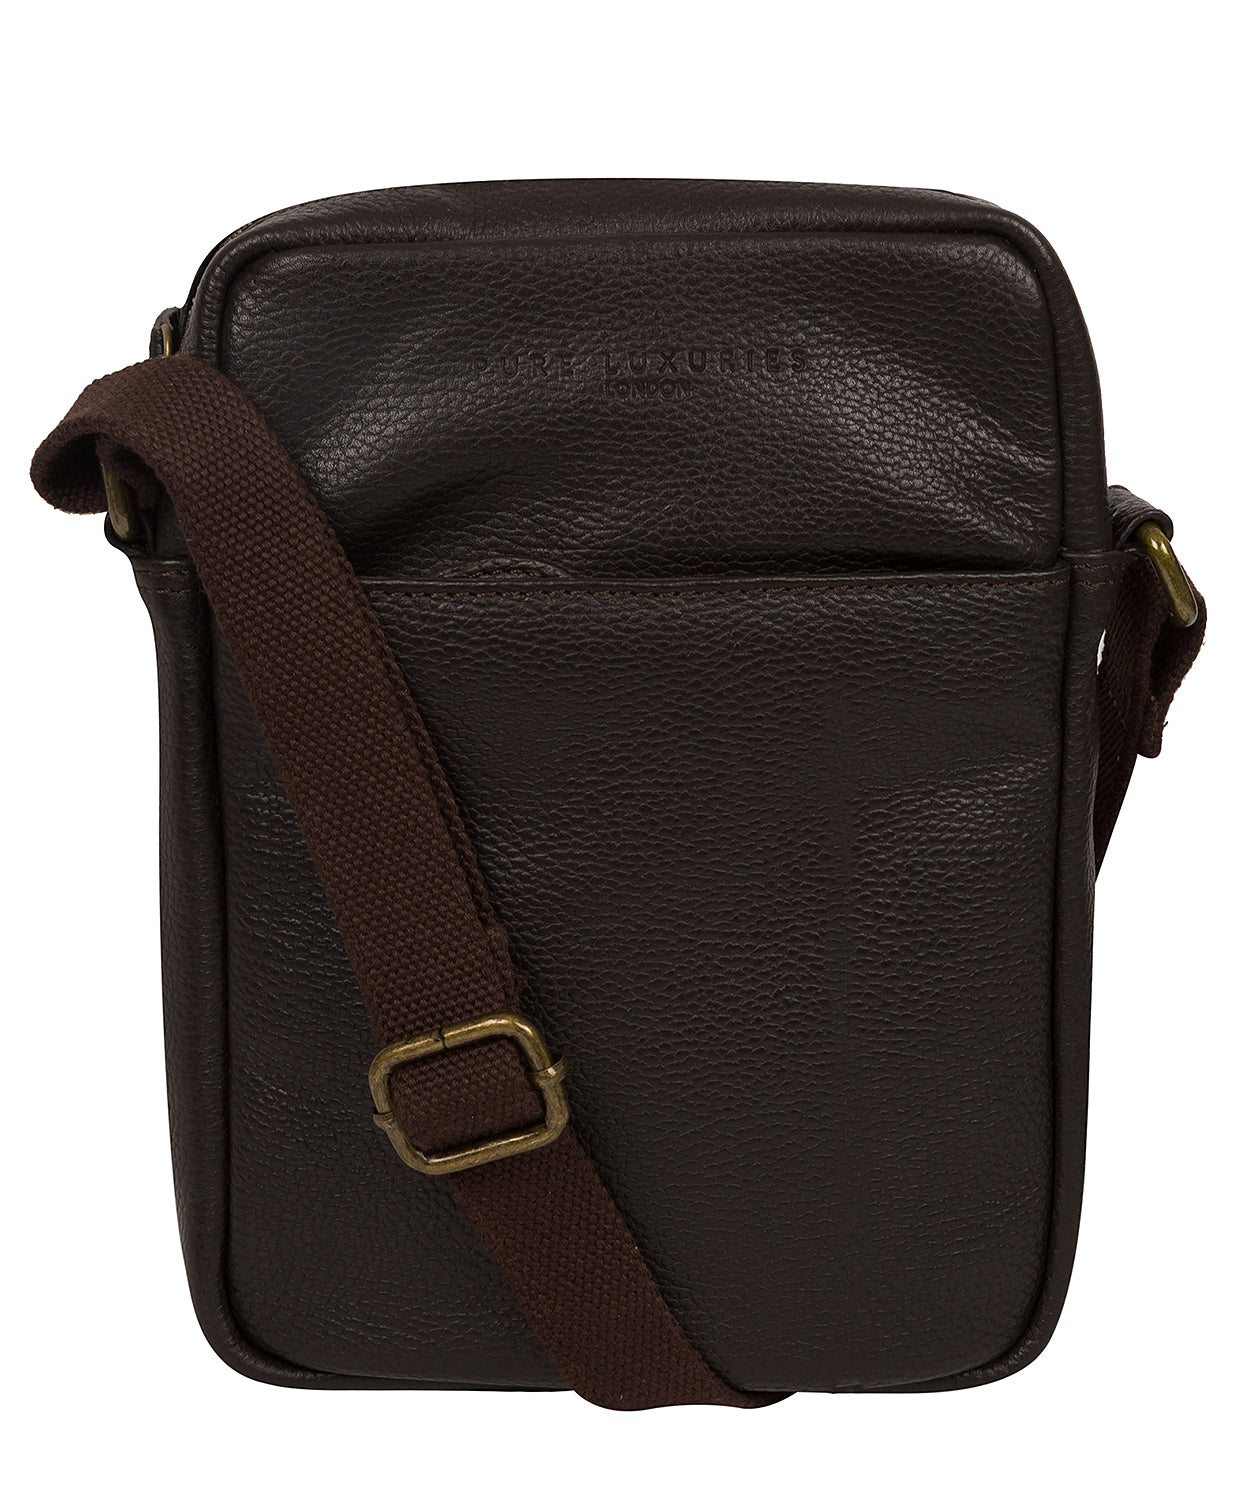 Brown Leather Crossbody Bag 'Crew' by Pure Luxuries – Pure Luxuries London